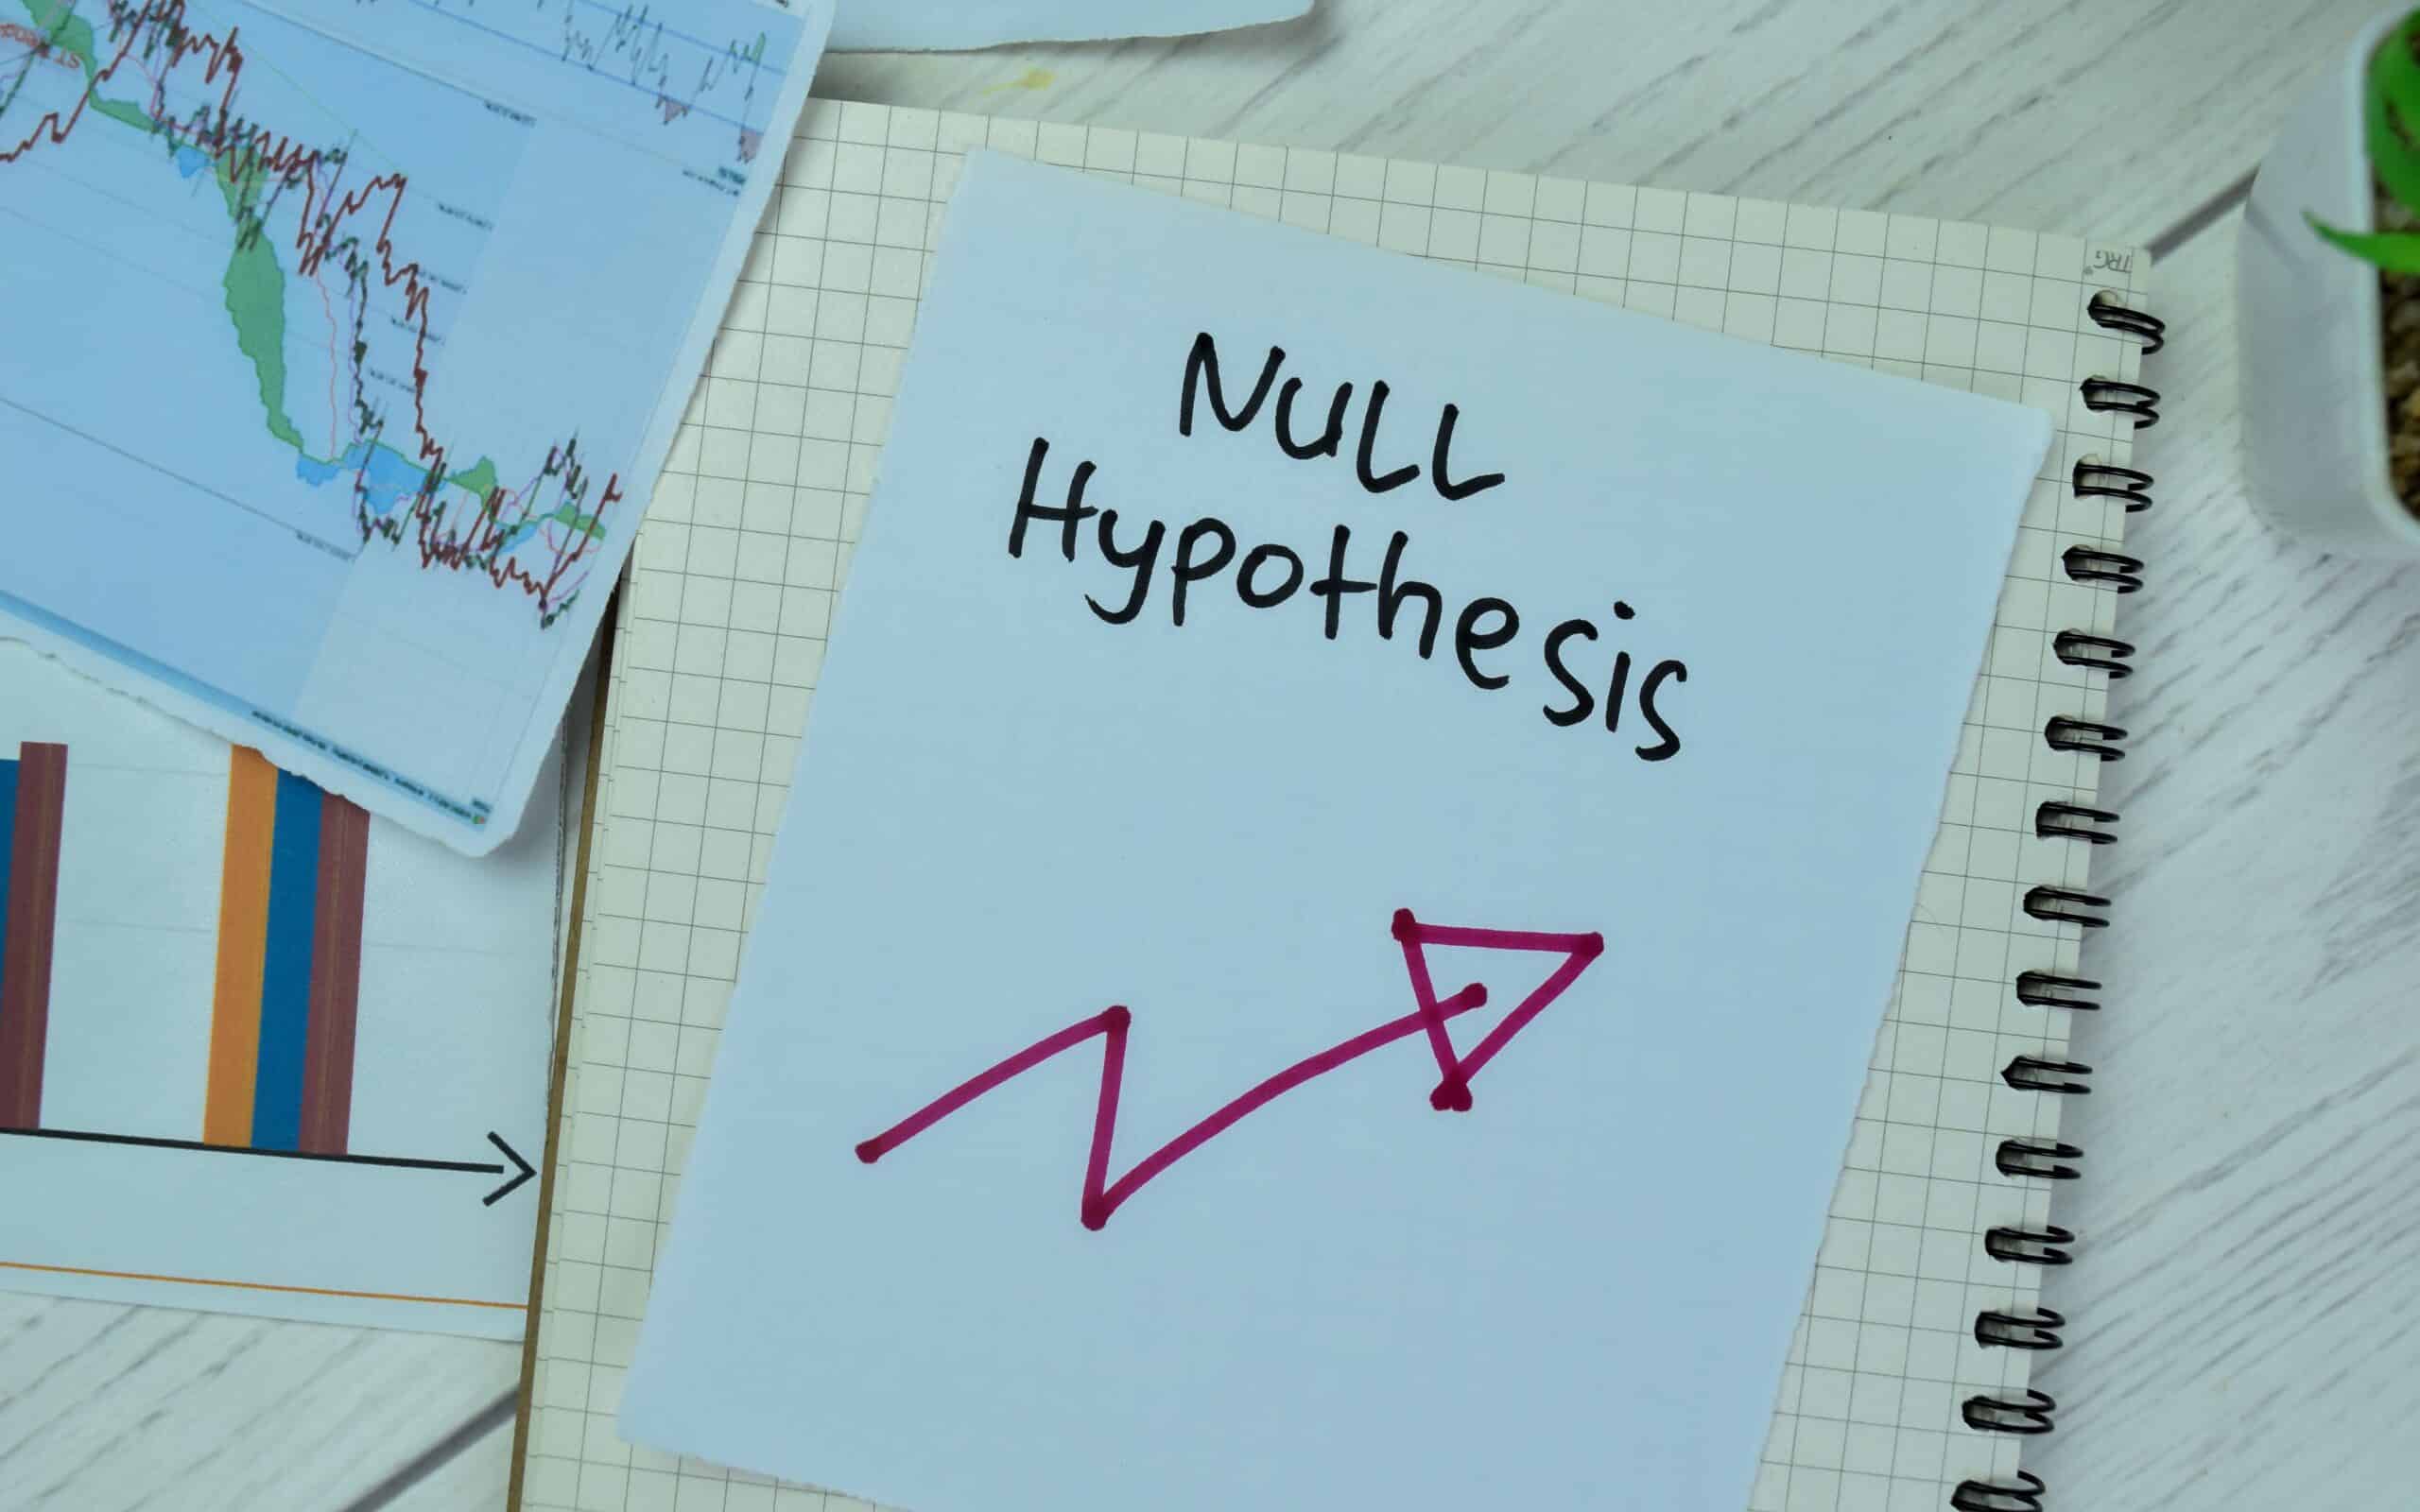 what is null hypothesis in statistics